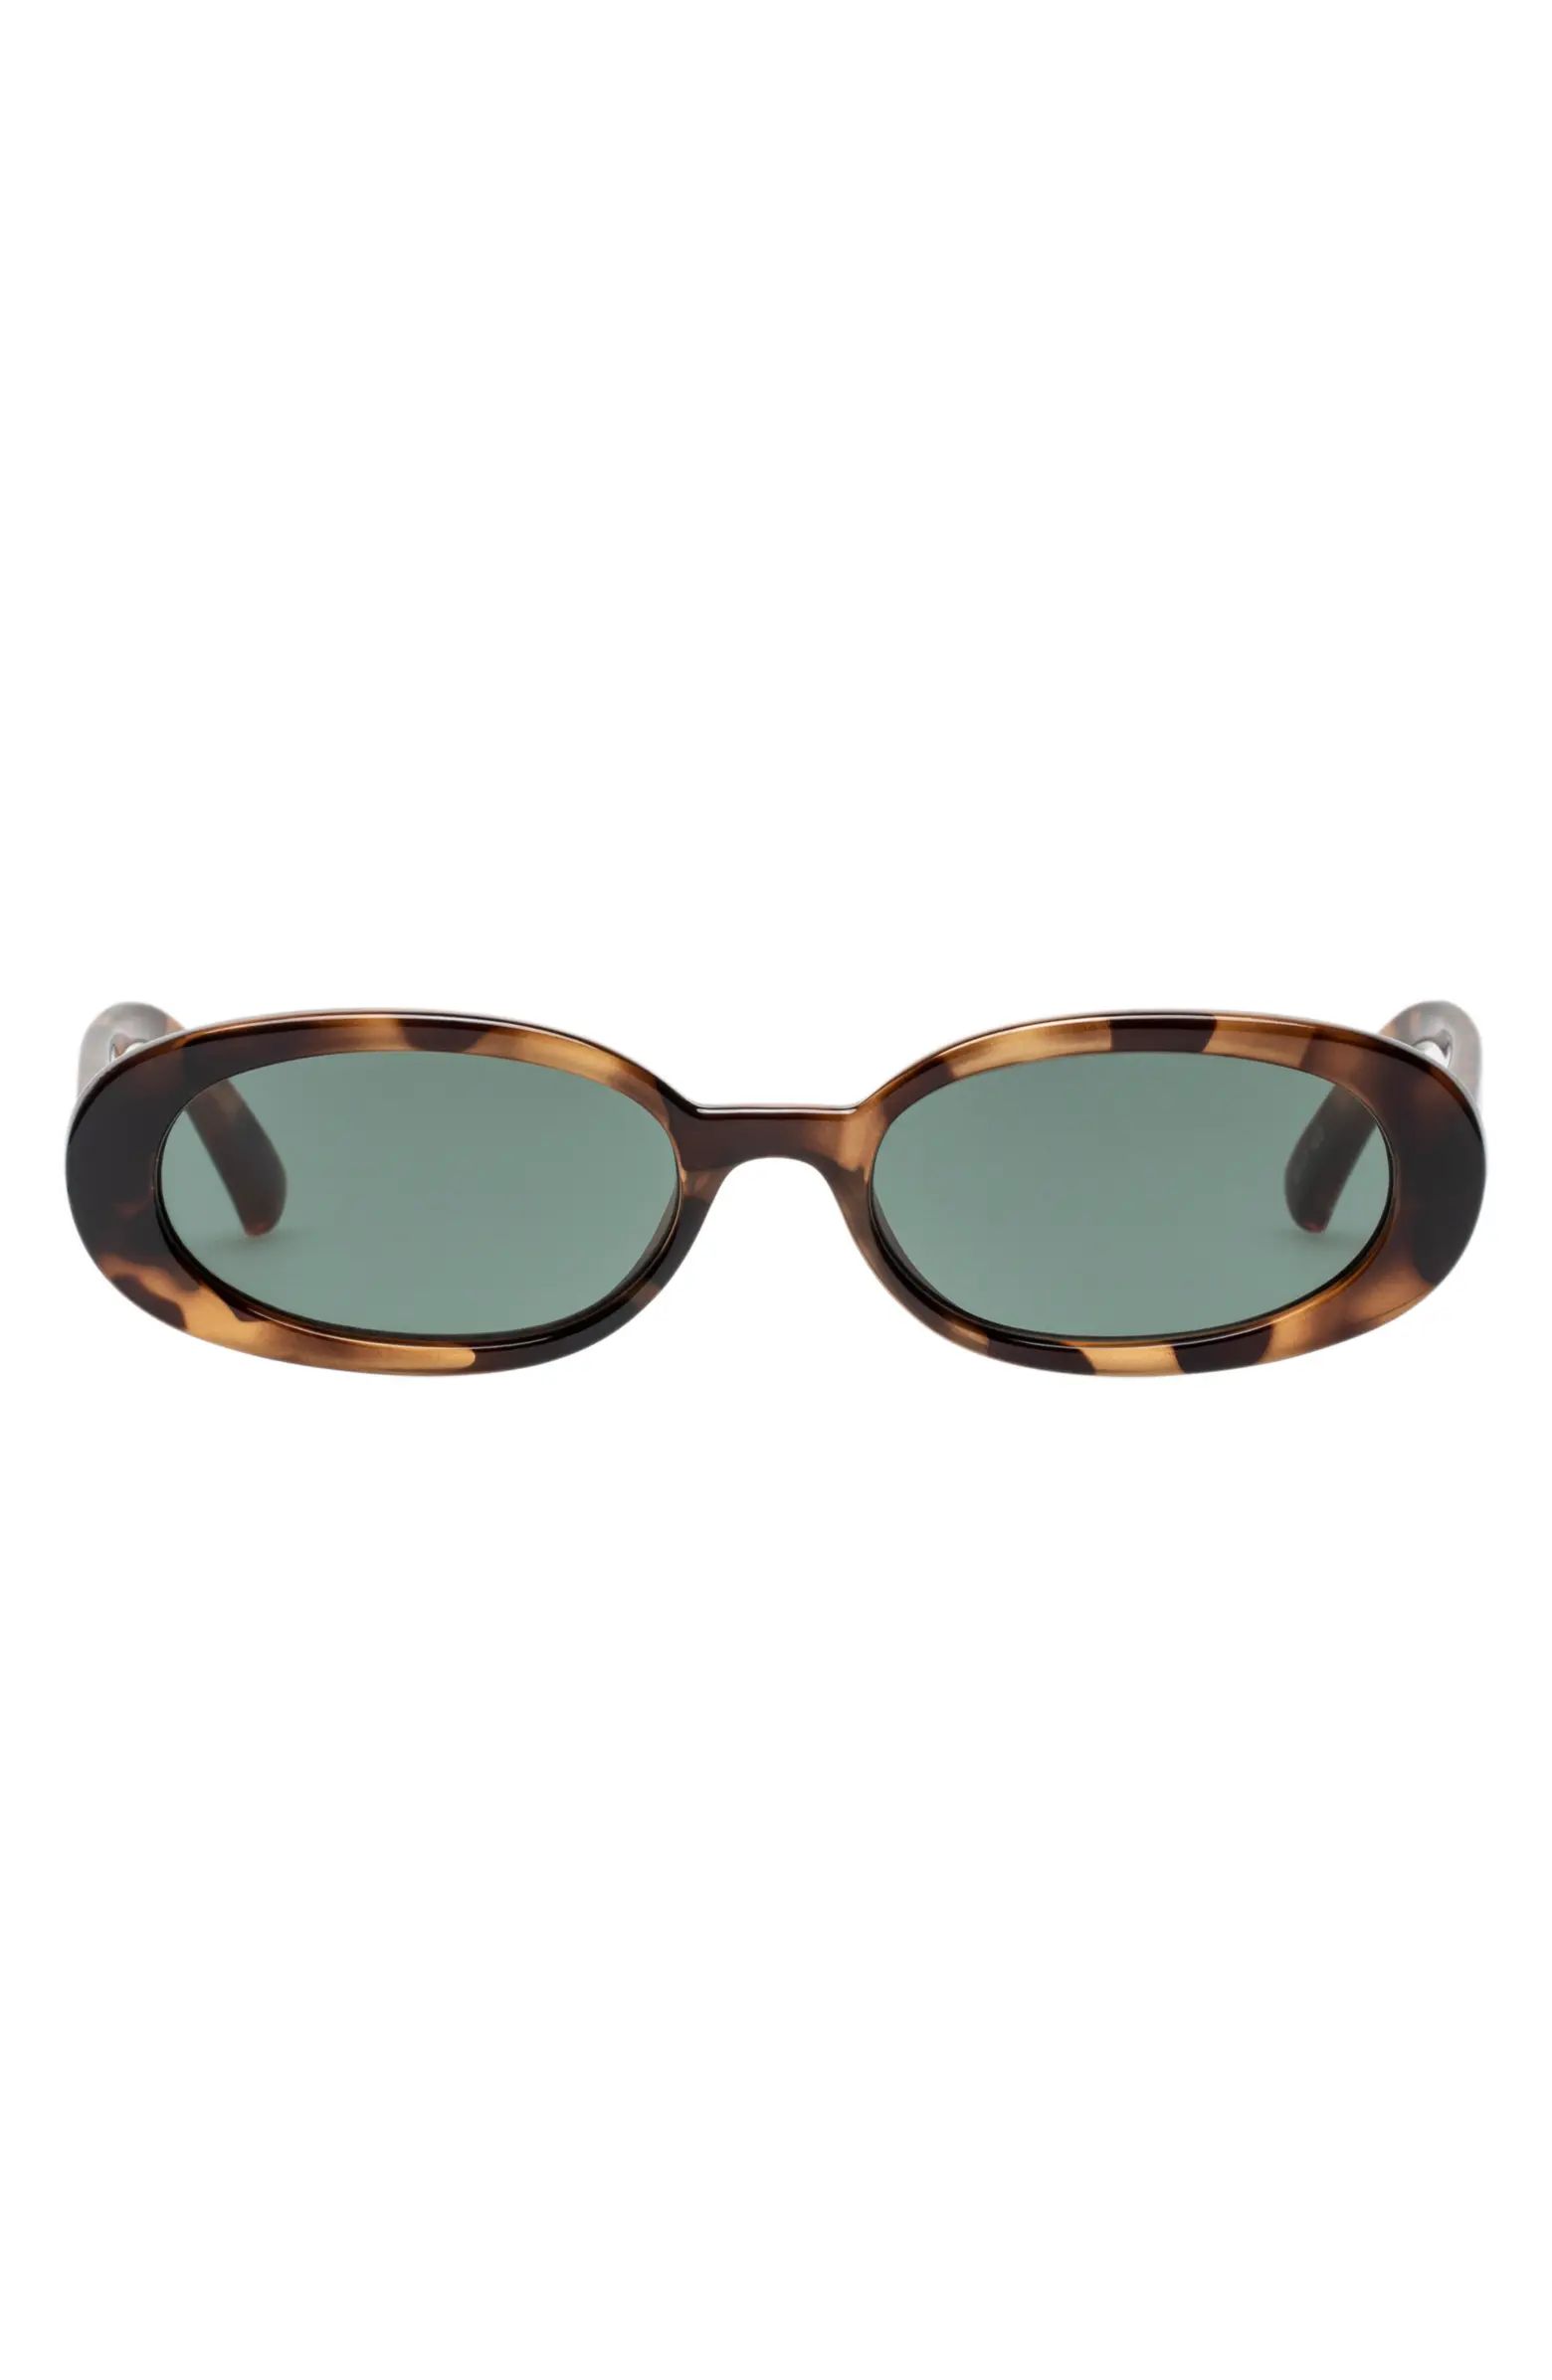 Le Specs Outta Love 51mm Oval Sunglasses | Nordstrom | Nordstrom